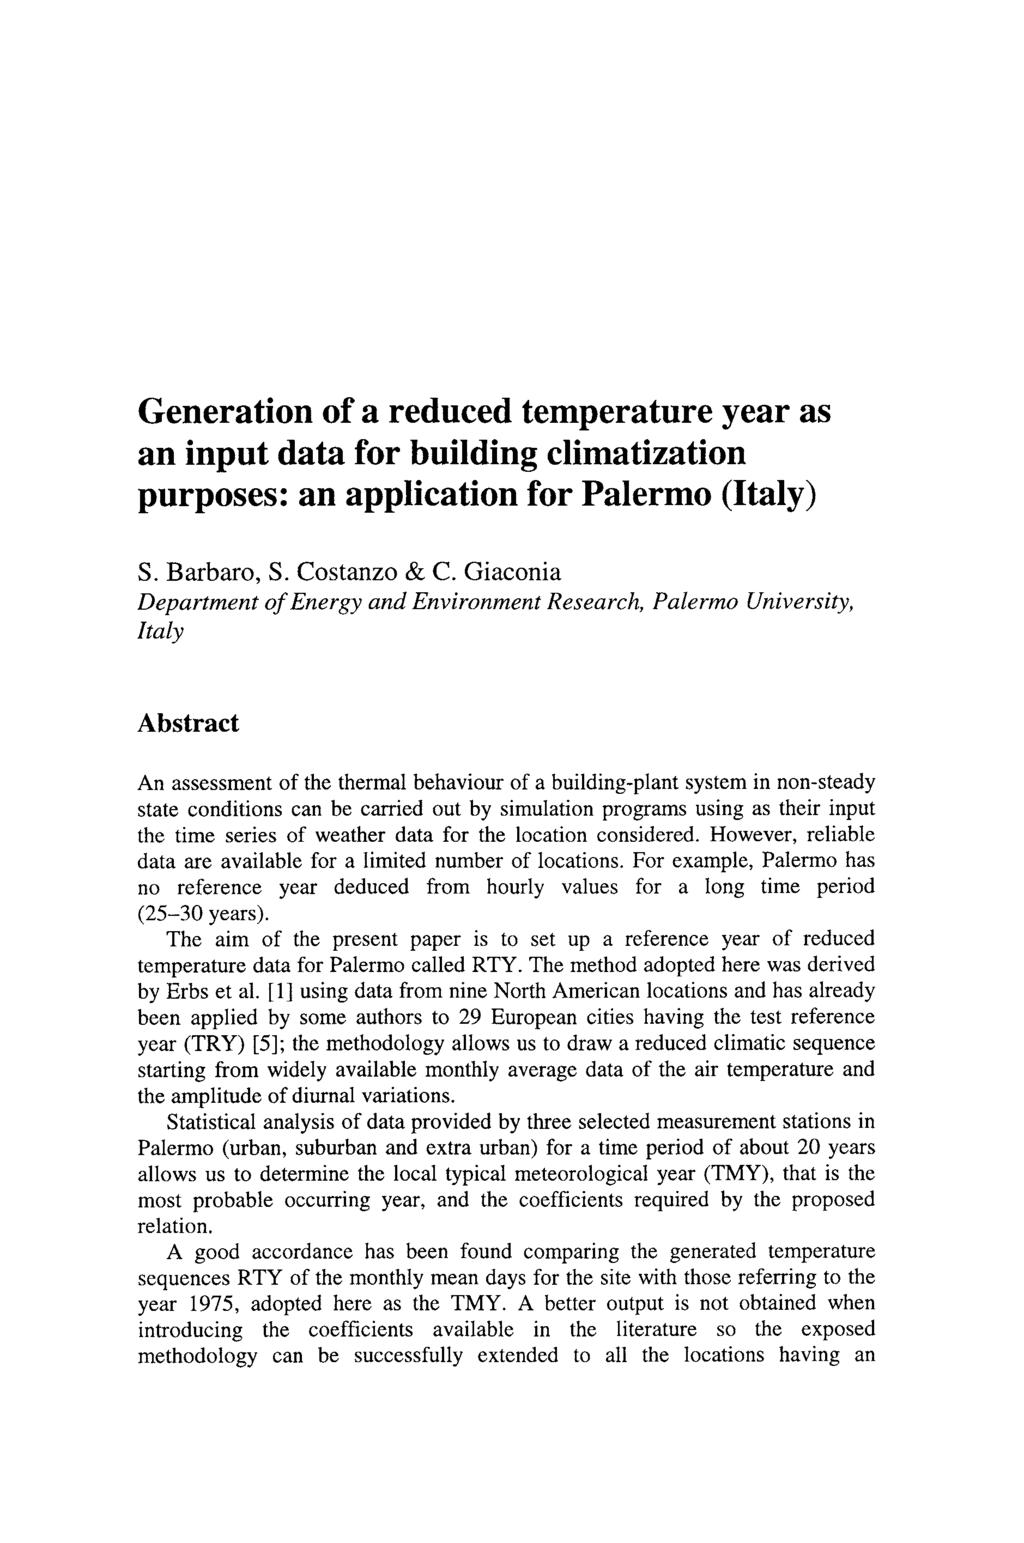 Generation of a reduced temperature year as an input data for building climatization purposes: an application for Palermo (Italy) S. Barbaro, S. Costanzo & C.